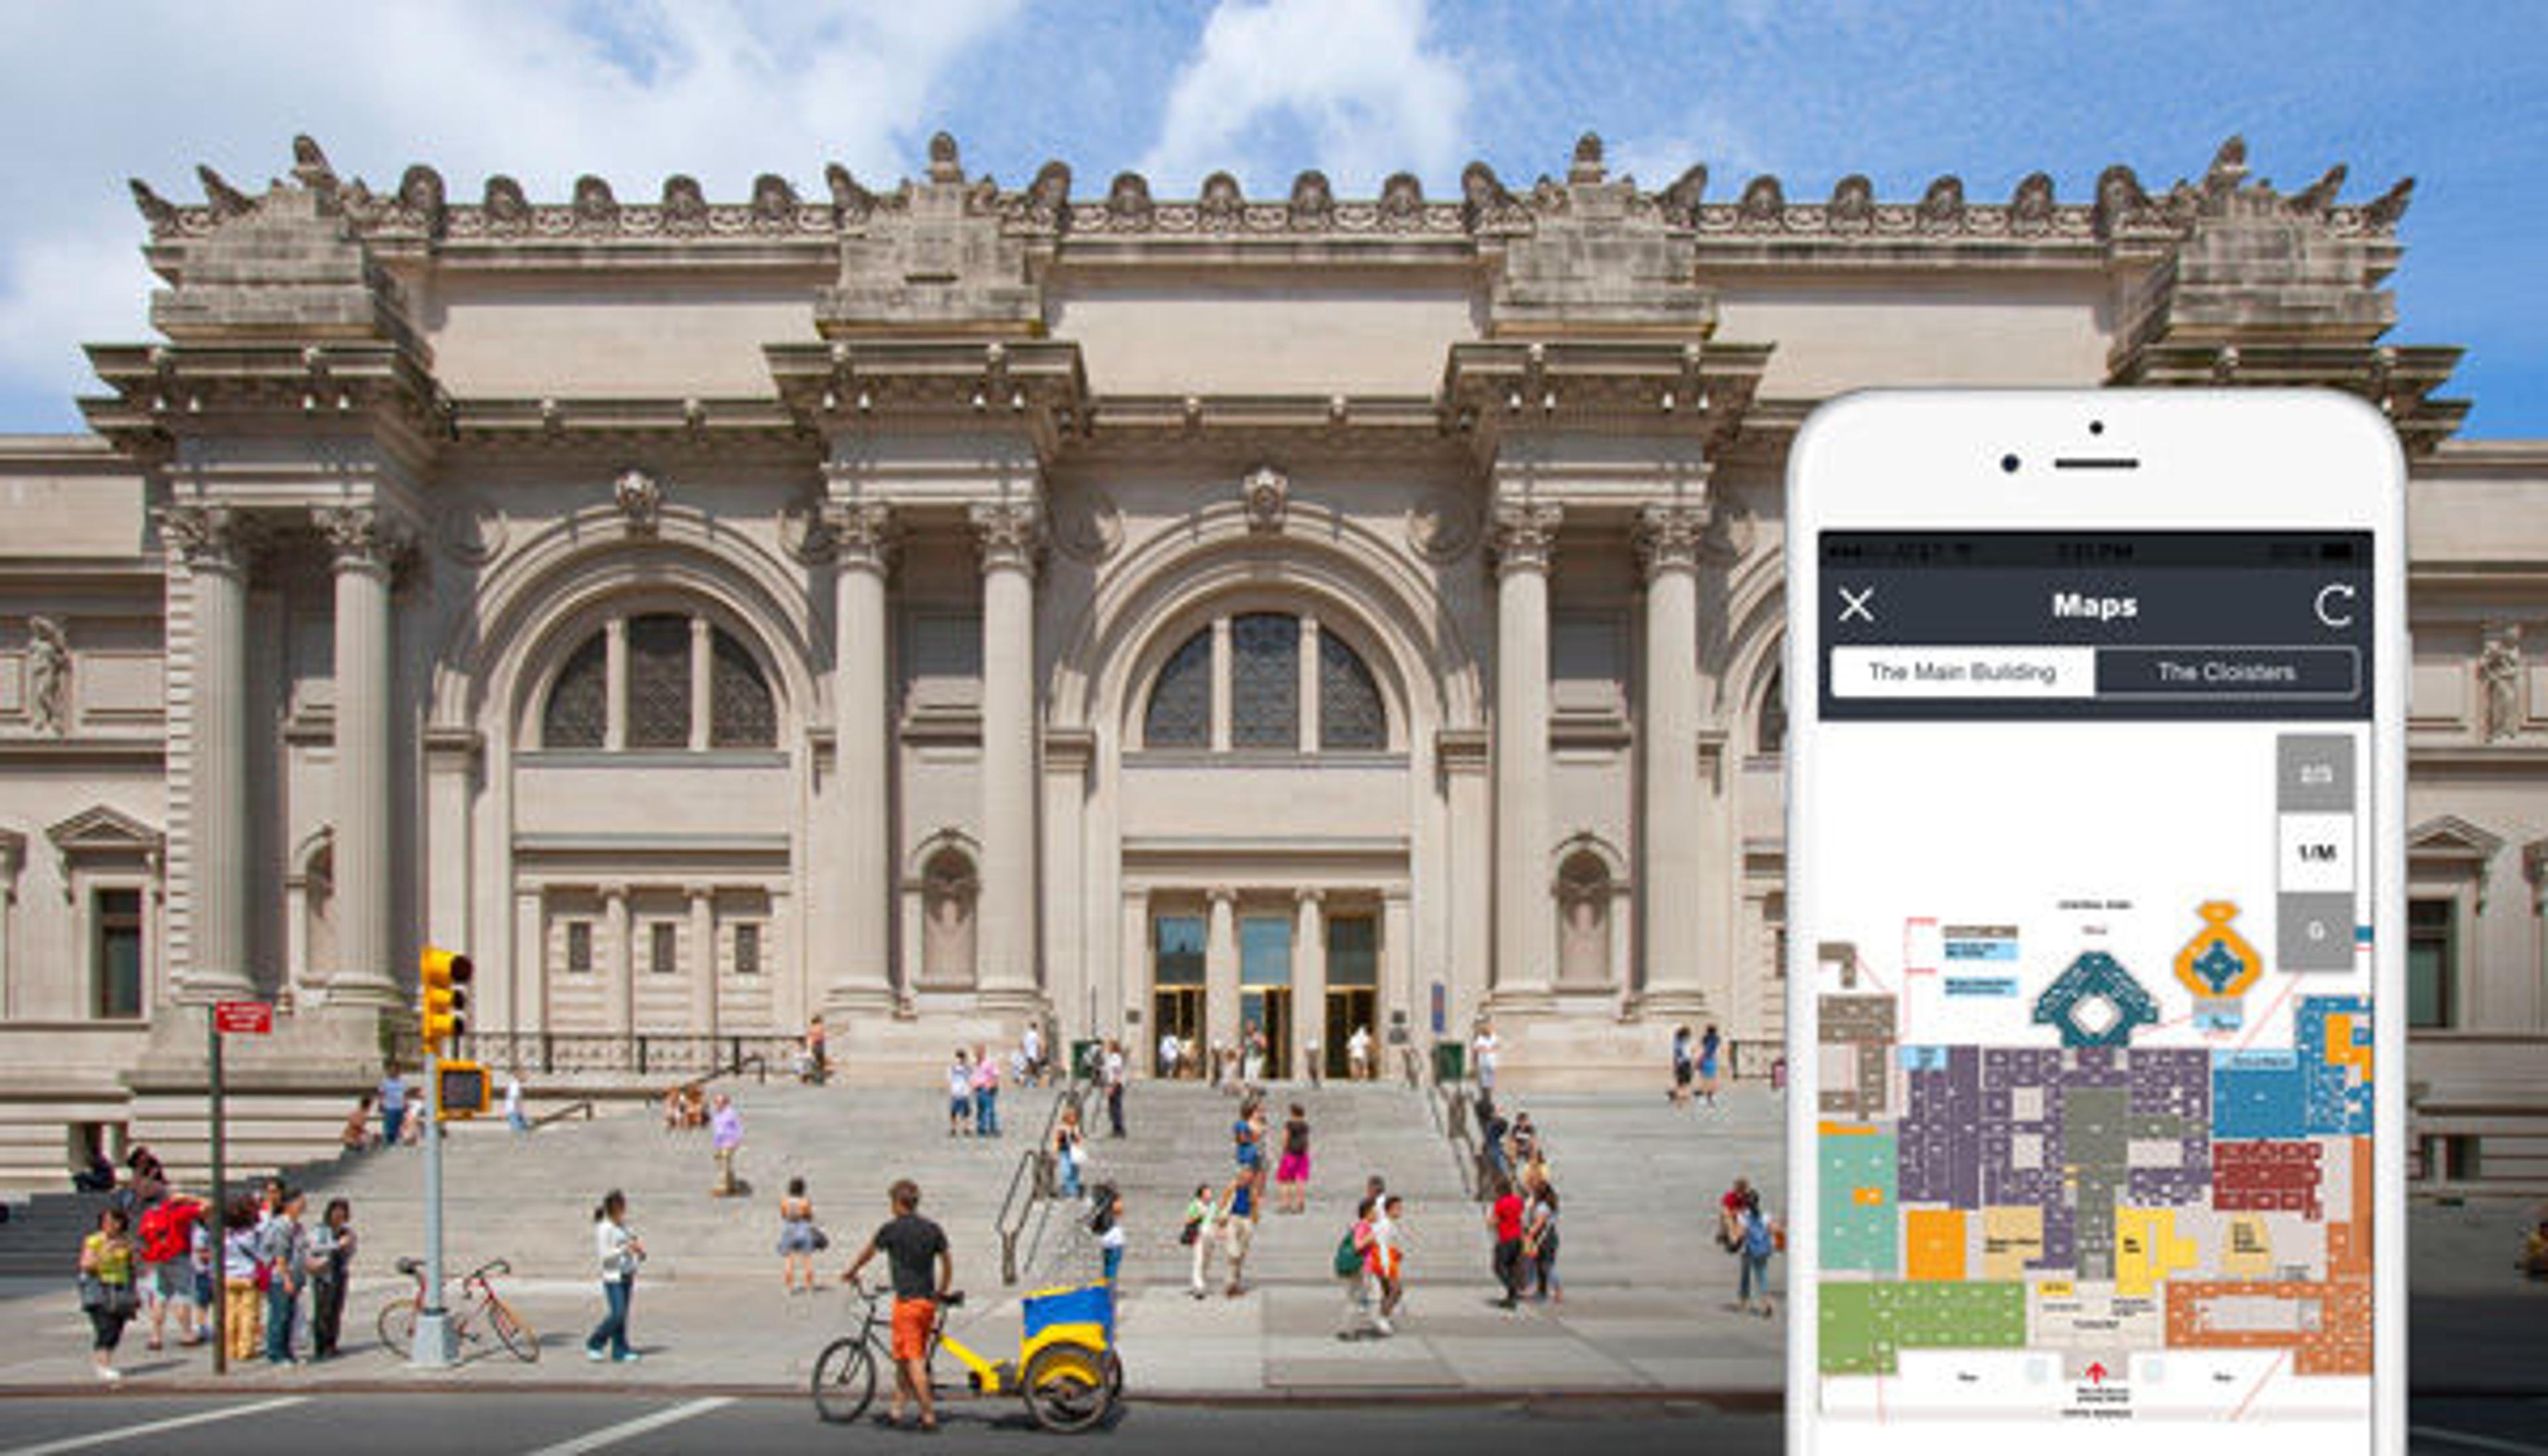 The Met app now features a map of the Museum